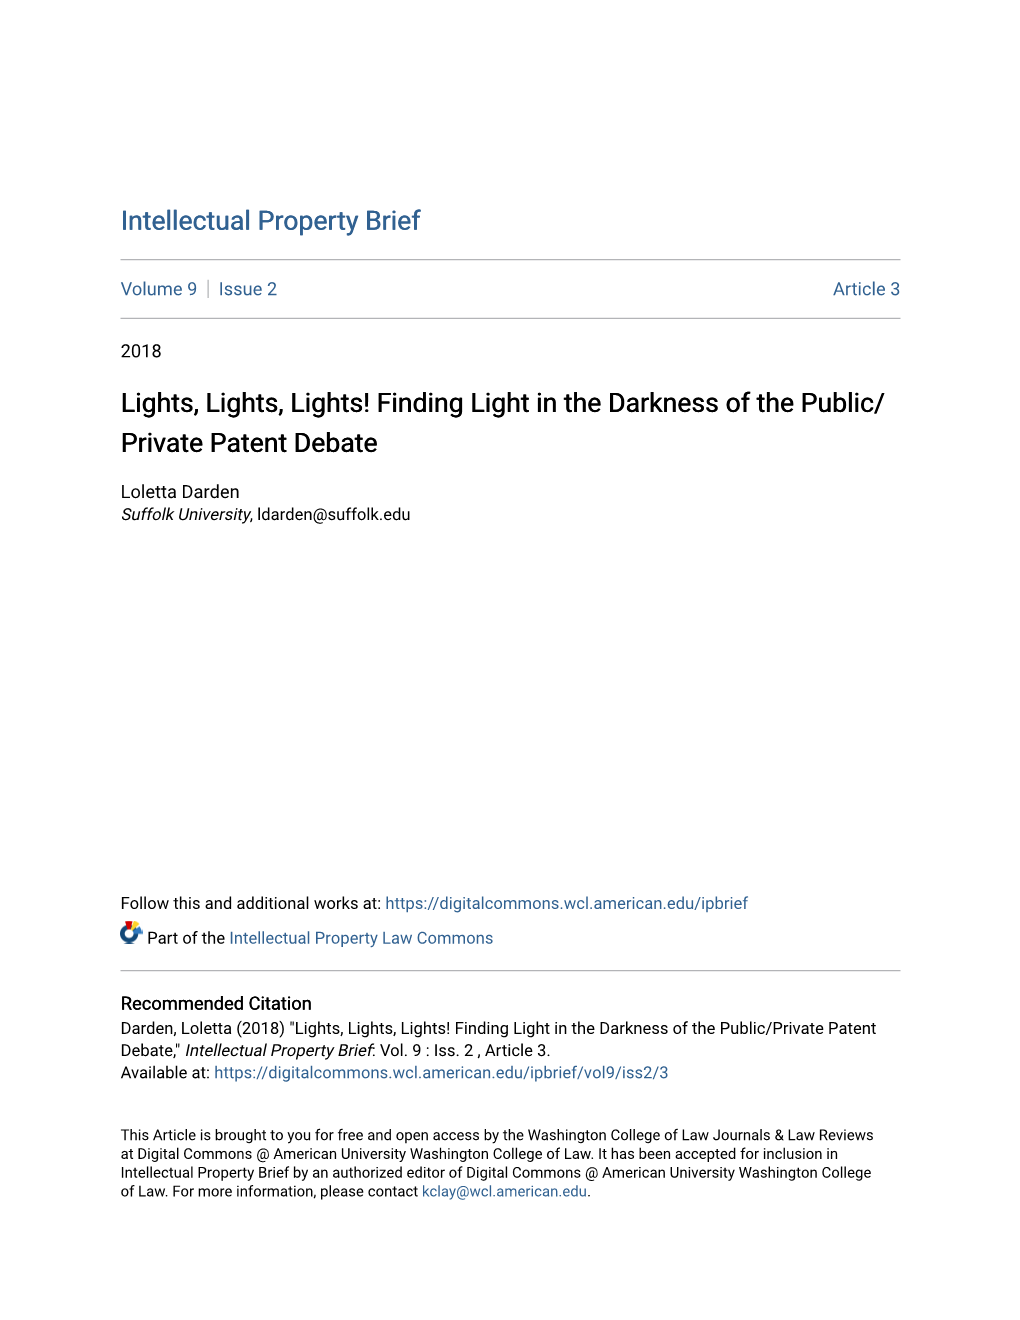 Finding Light in the Darkness of the Public/Private Patent Debate," Intellectual Property Brief: Vol